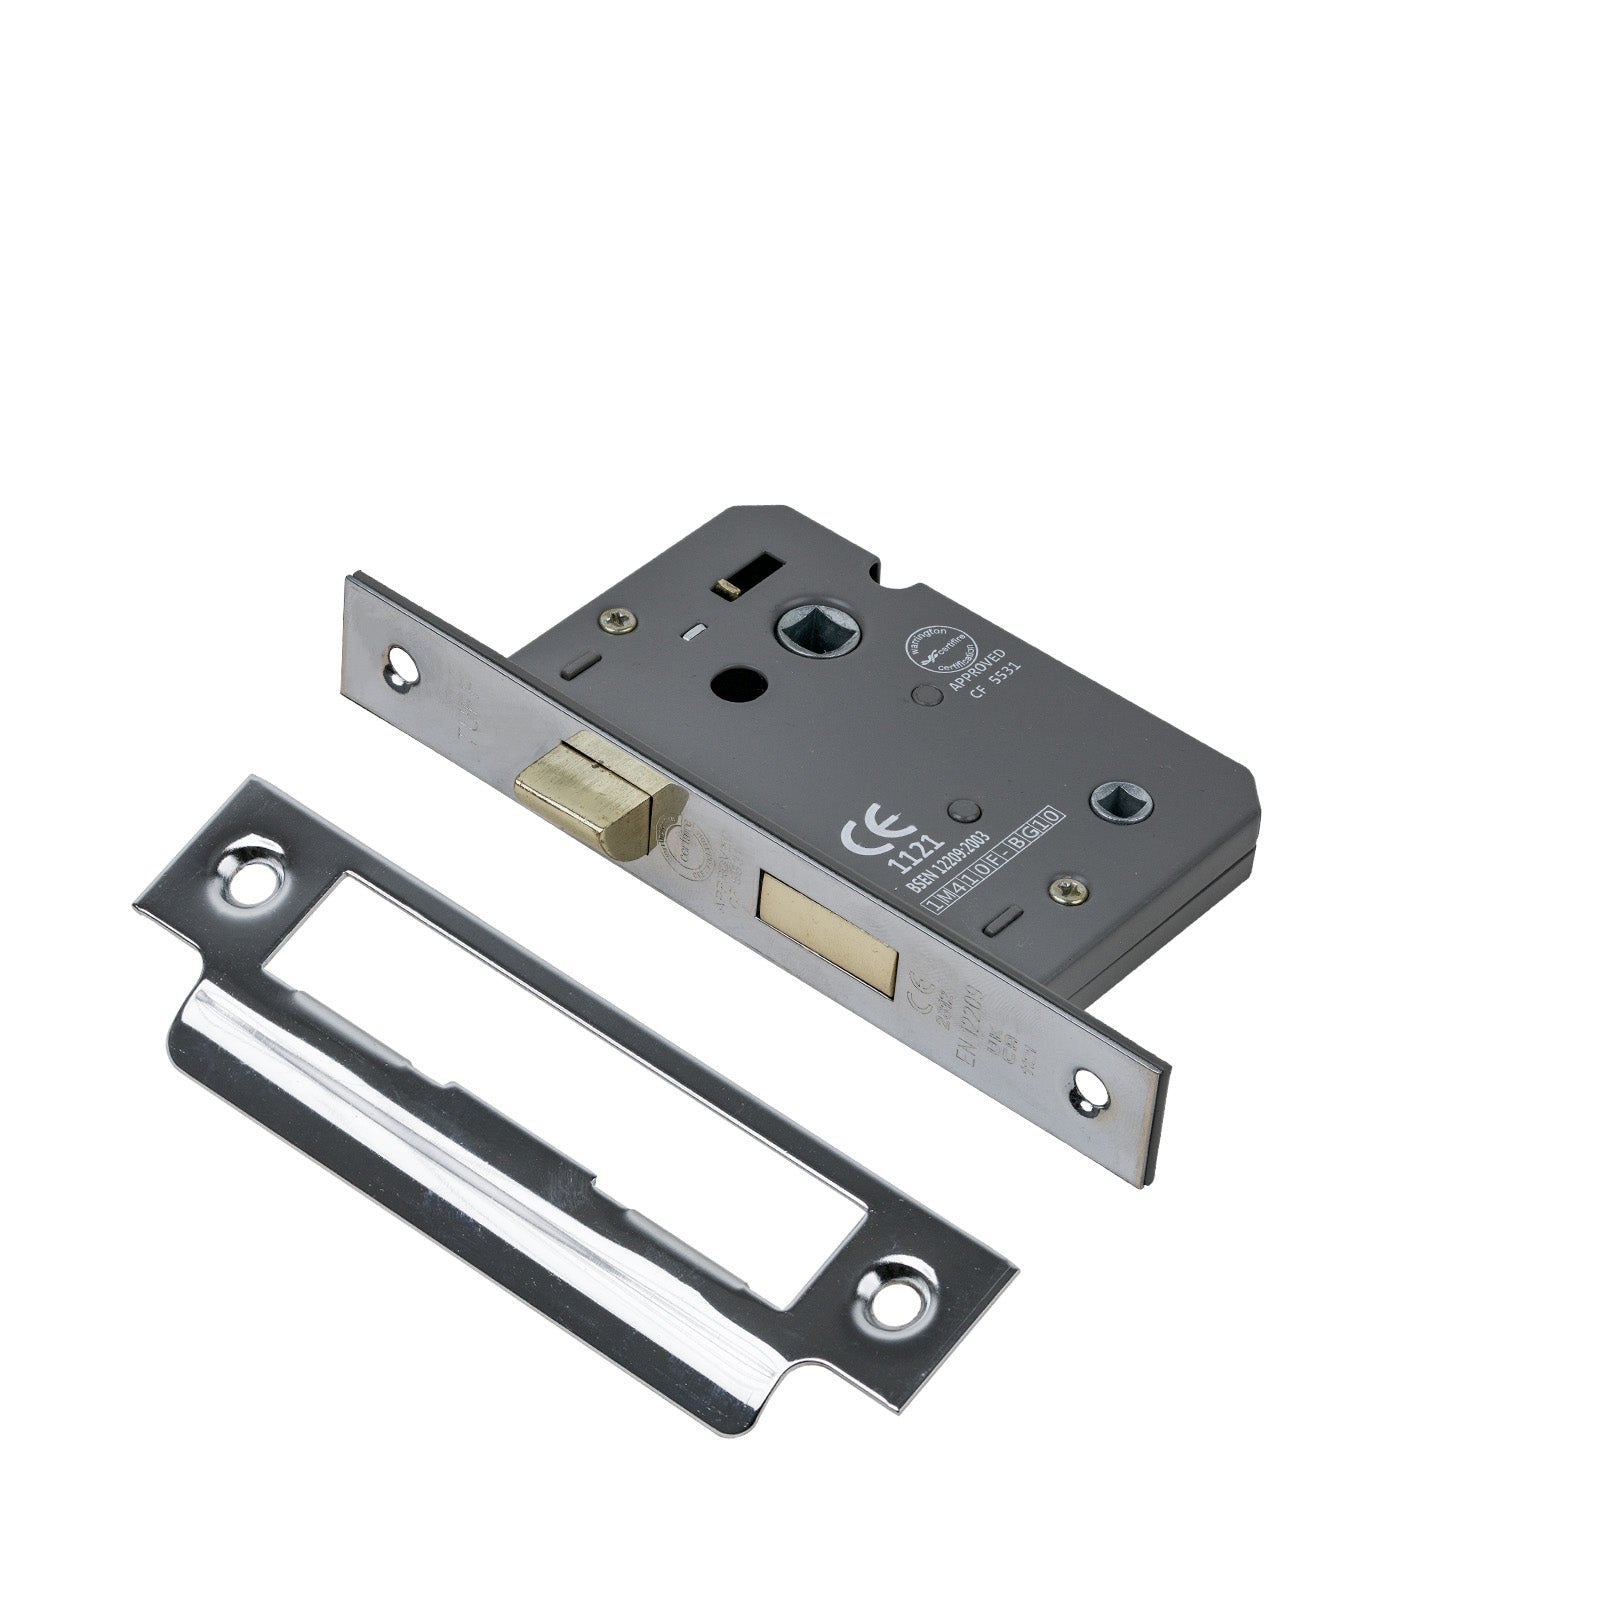 SHOW Bathroom Sash Lock - 2.5 Inch with Polished Chrome finished forend and striker plate